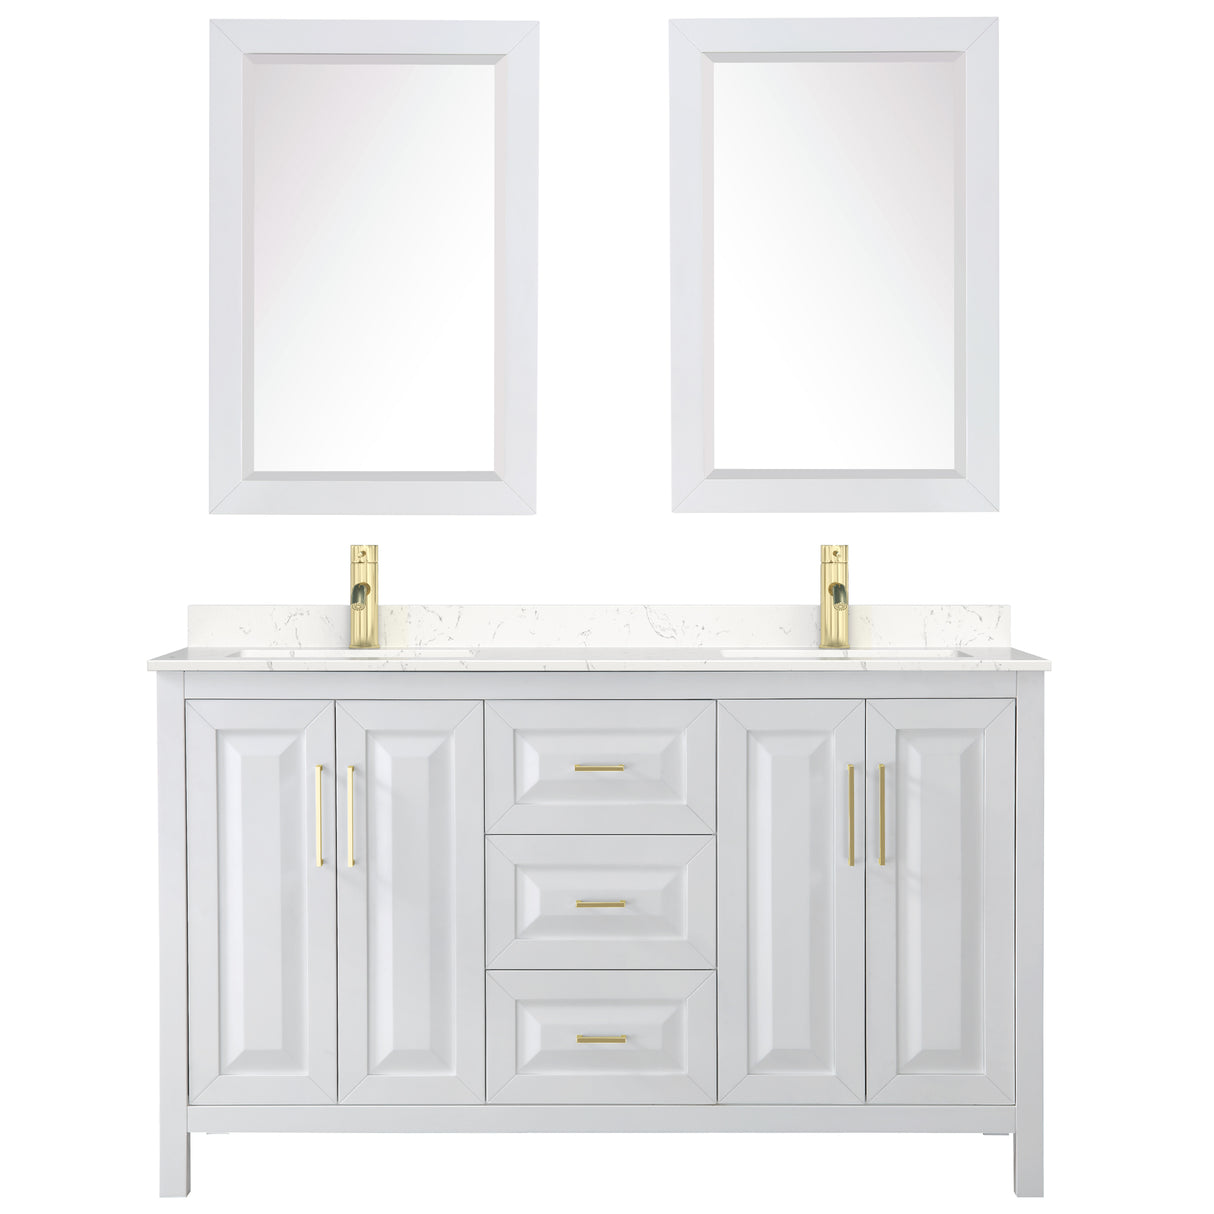 Daria 60 Inch Double Bathroom Vanity in White Carrara Cultured Marble Countertop Undermount Square Sinks 24 Inch Mirrors Brushed Gold Trim